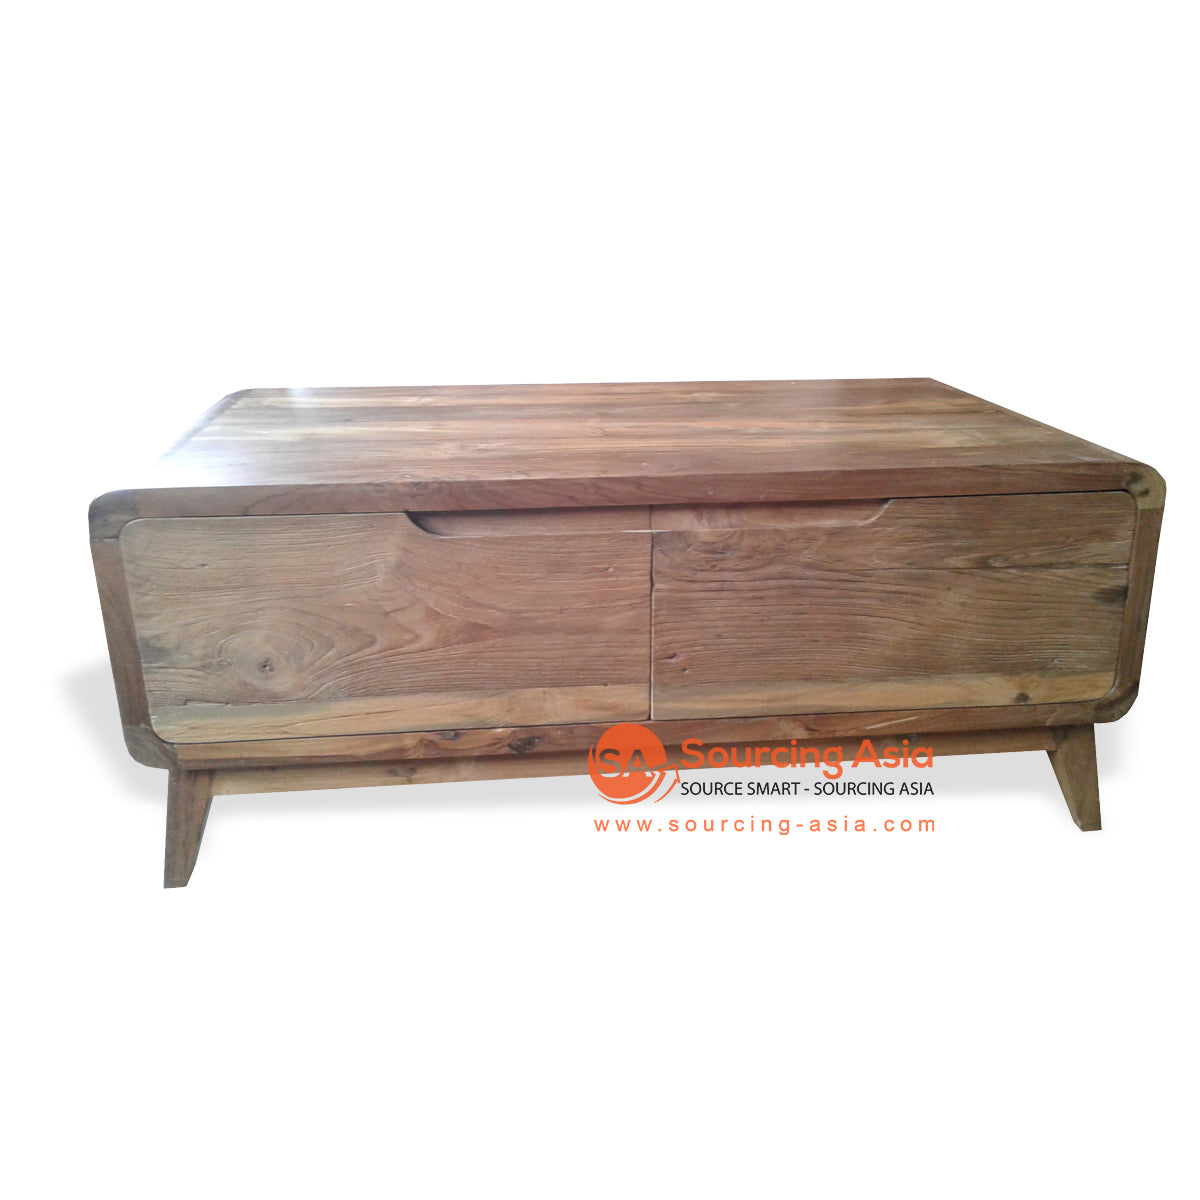 WK301 NATURAL RECYCLED BOAT WOOD FOUR DRAWERS COFFEE TABLE